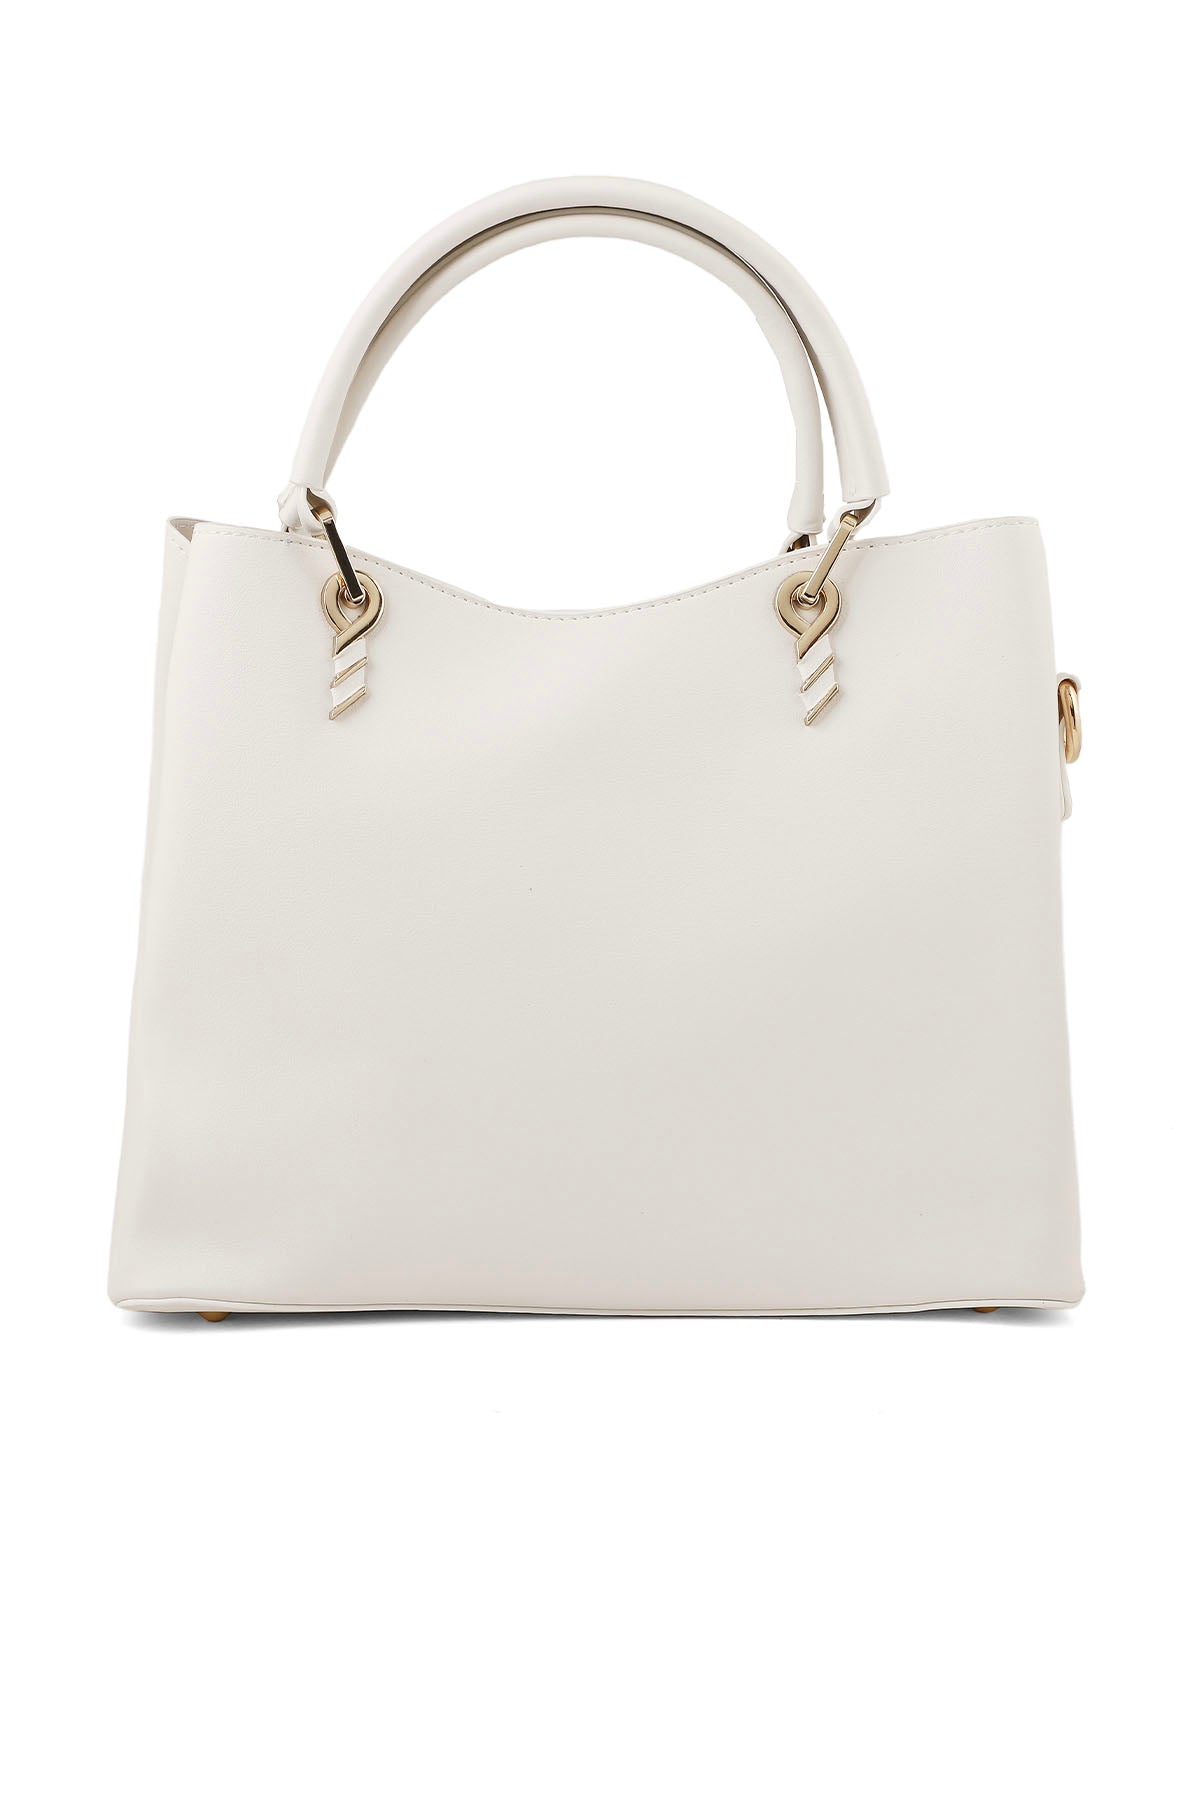 Formal Tote Hand Bags B15058-White